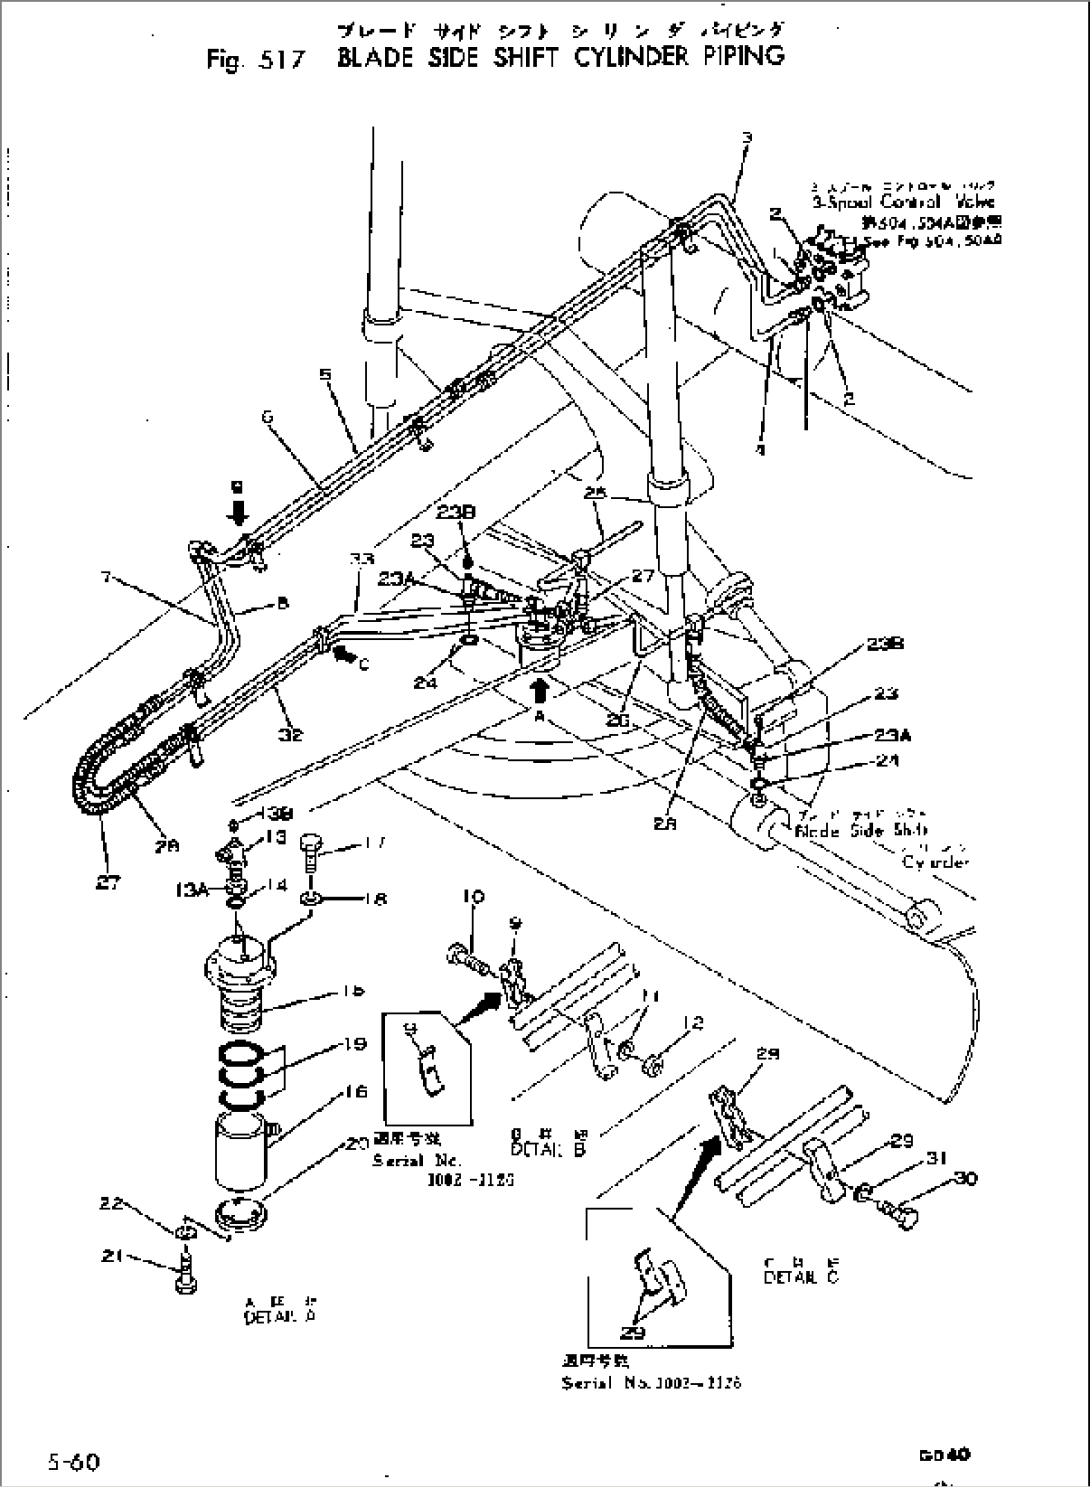 BLADE SIDE SHIFT CYLINDER PIPING